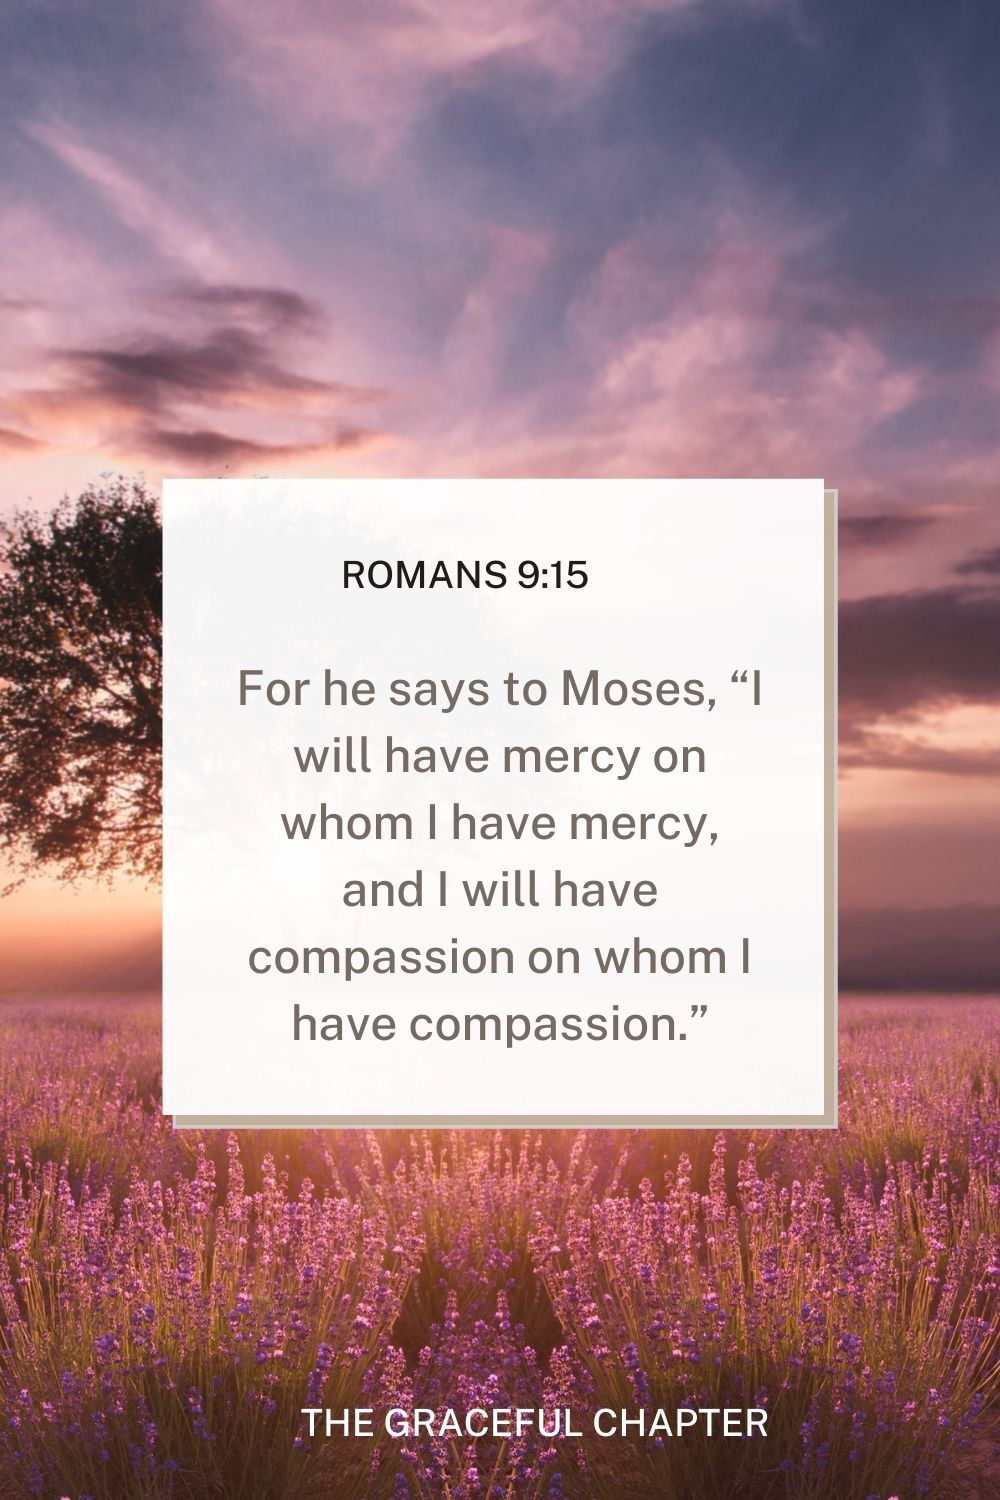 For he says to Moses, “I will have mercy on whom I have mercy, and I will have compassion on whom I have compassion.” Romans 9:15 - mercy bible verses esv